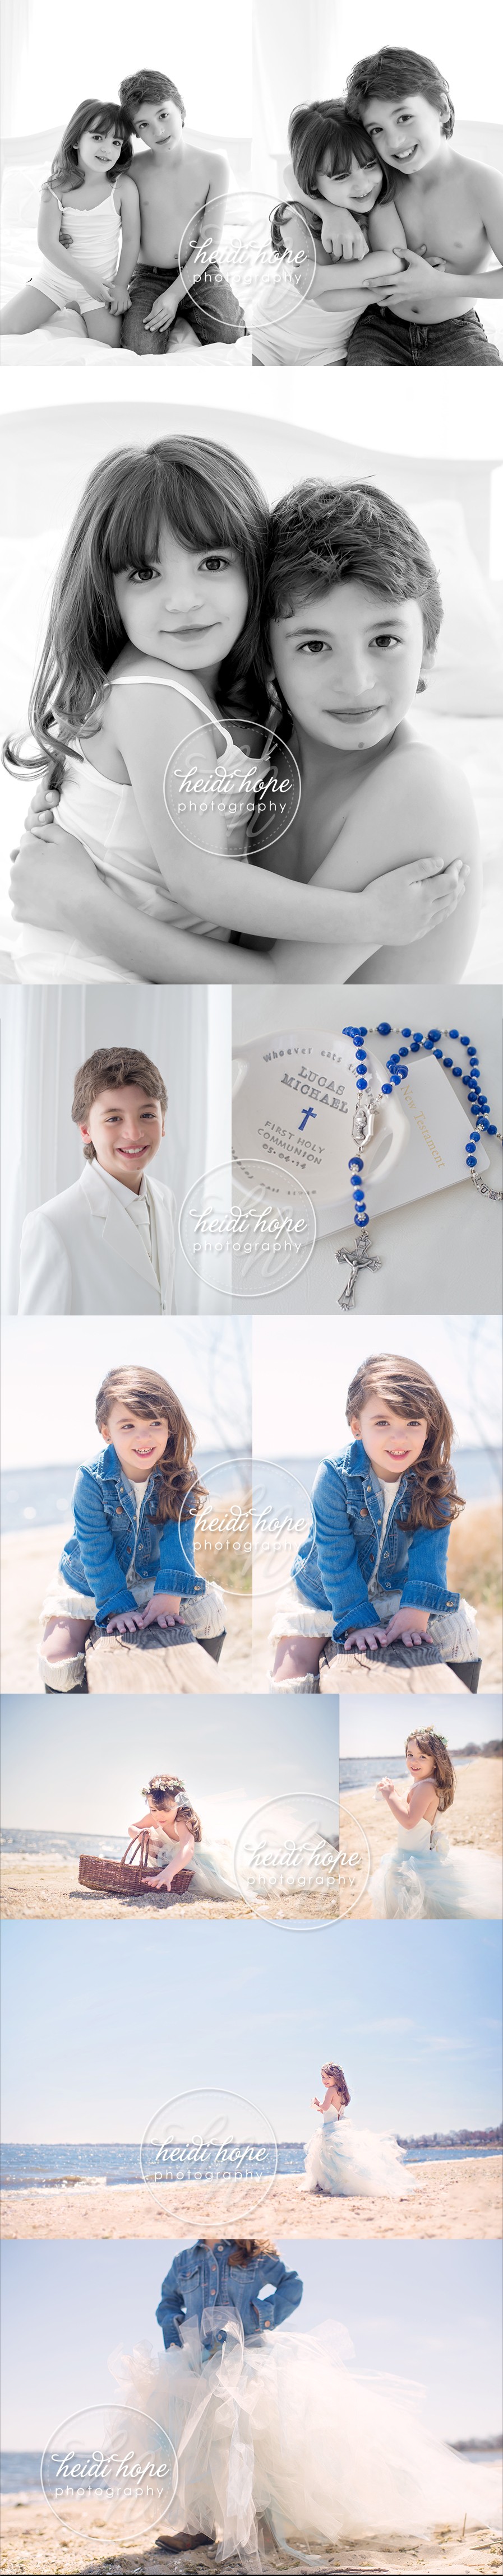 brother and sister sibling portrait session in the studio and at the beach